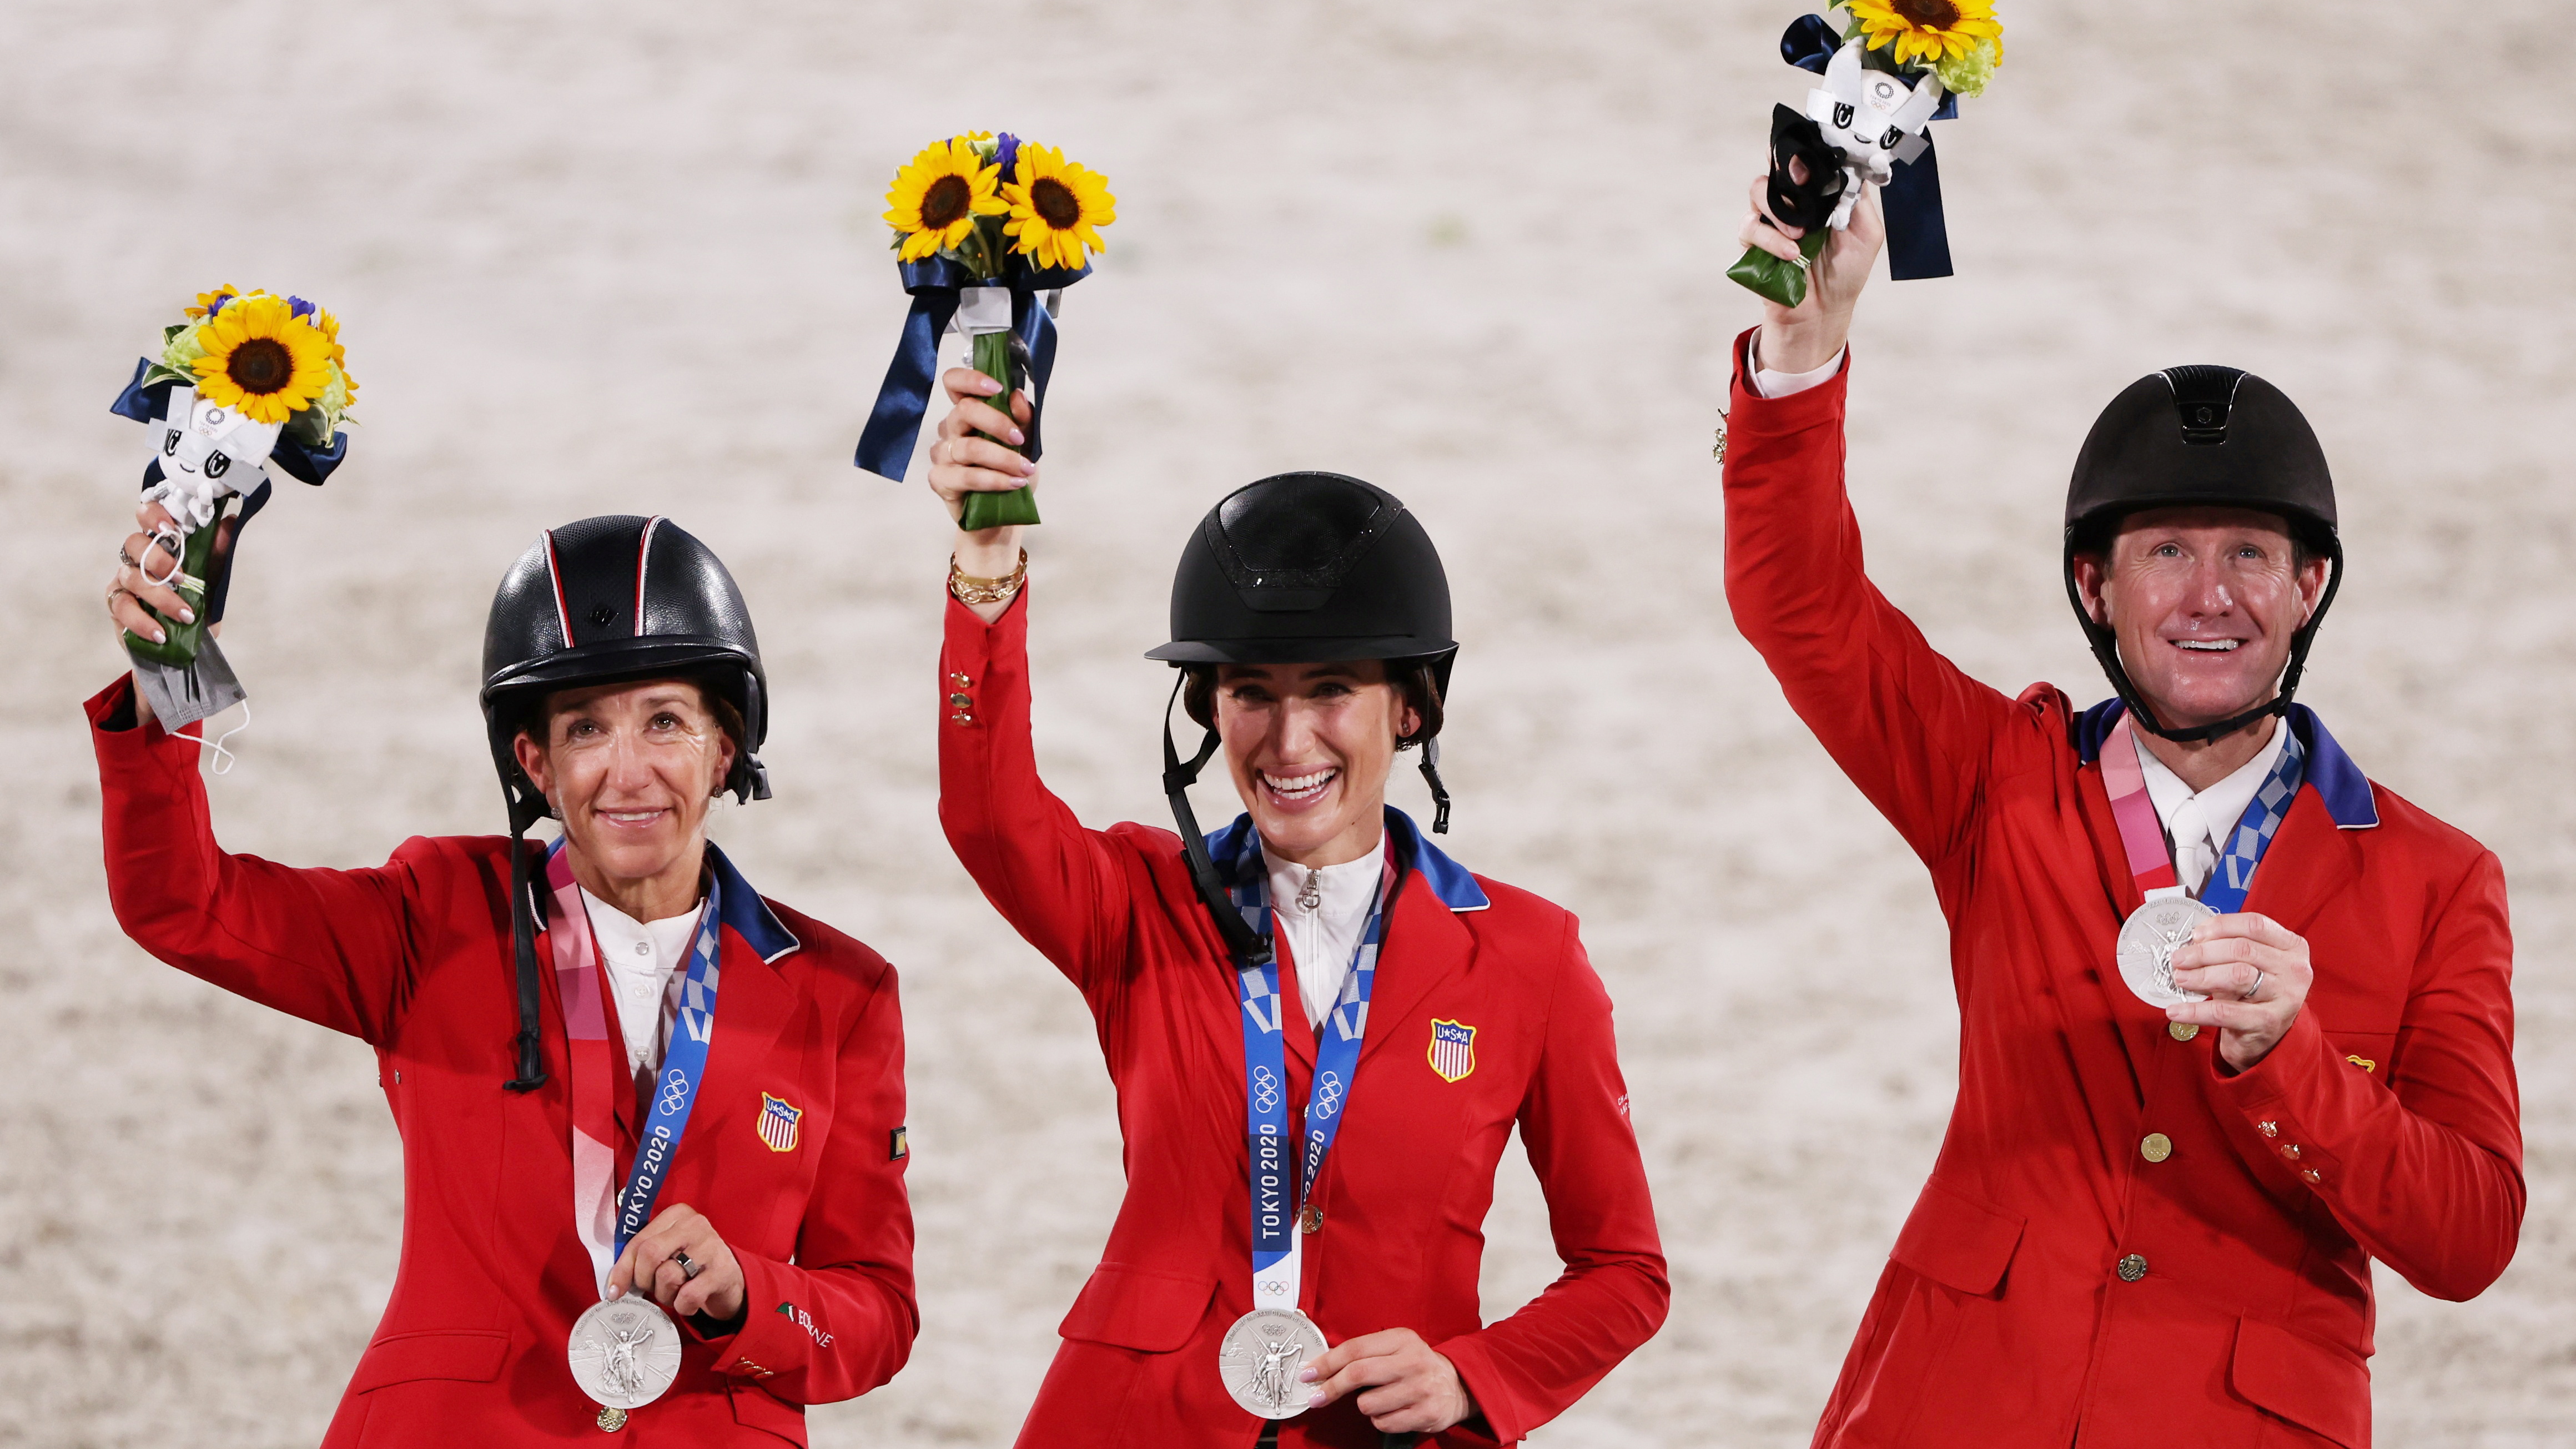 Tokyo 2020 Olympics - Equestrian - Jumping - Team - Medal Ceremony - Equestrian Park - Tokyo, Japan - August 7, 2021. Silver medallists Laura Kraut of the United States, Jessica Springsteen of the United States and McLain Ward of the United States celebrate. REUTERS/Alkis Konstantinidis